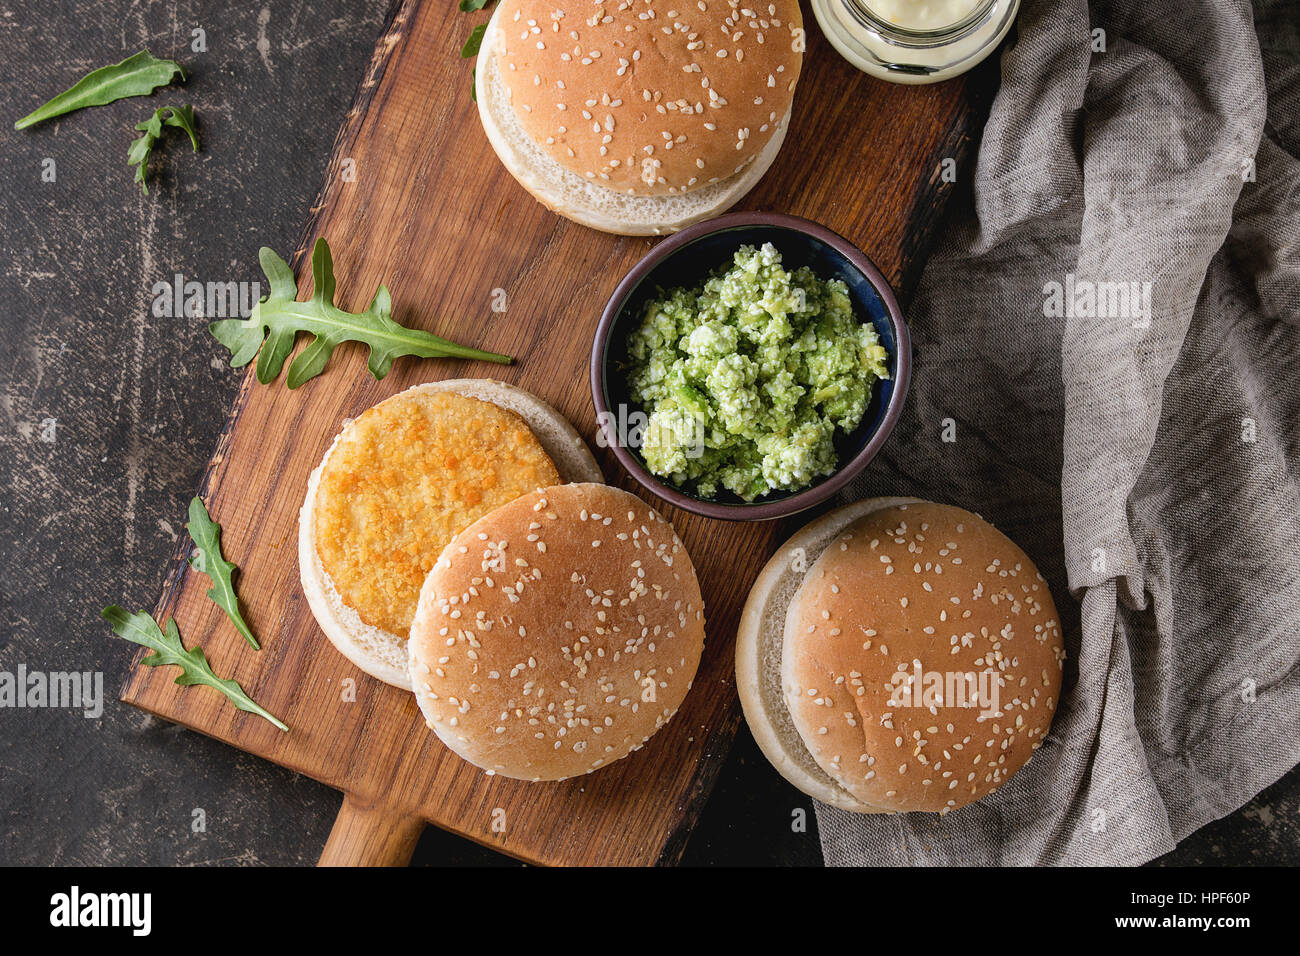 Ingredients for making vegan burger. Veggie cheese and onion cutlets, yogurt sauce, hamburger buns, herbs and avocado salad, served on wooden board wi Stock Photo